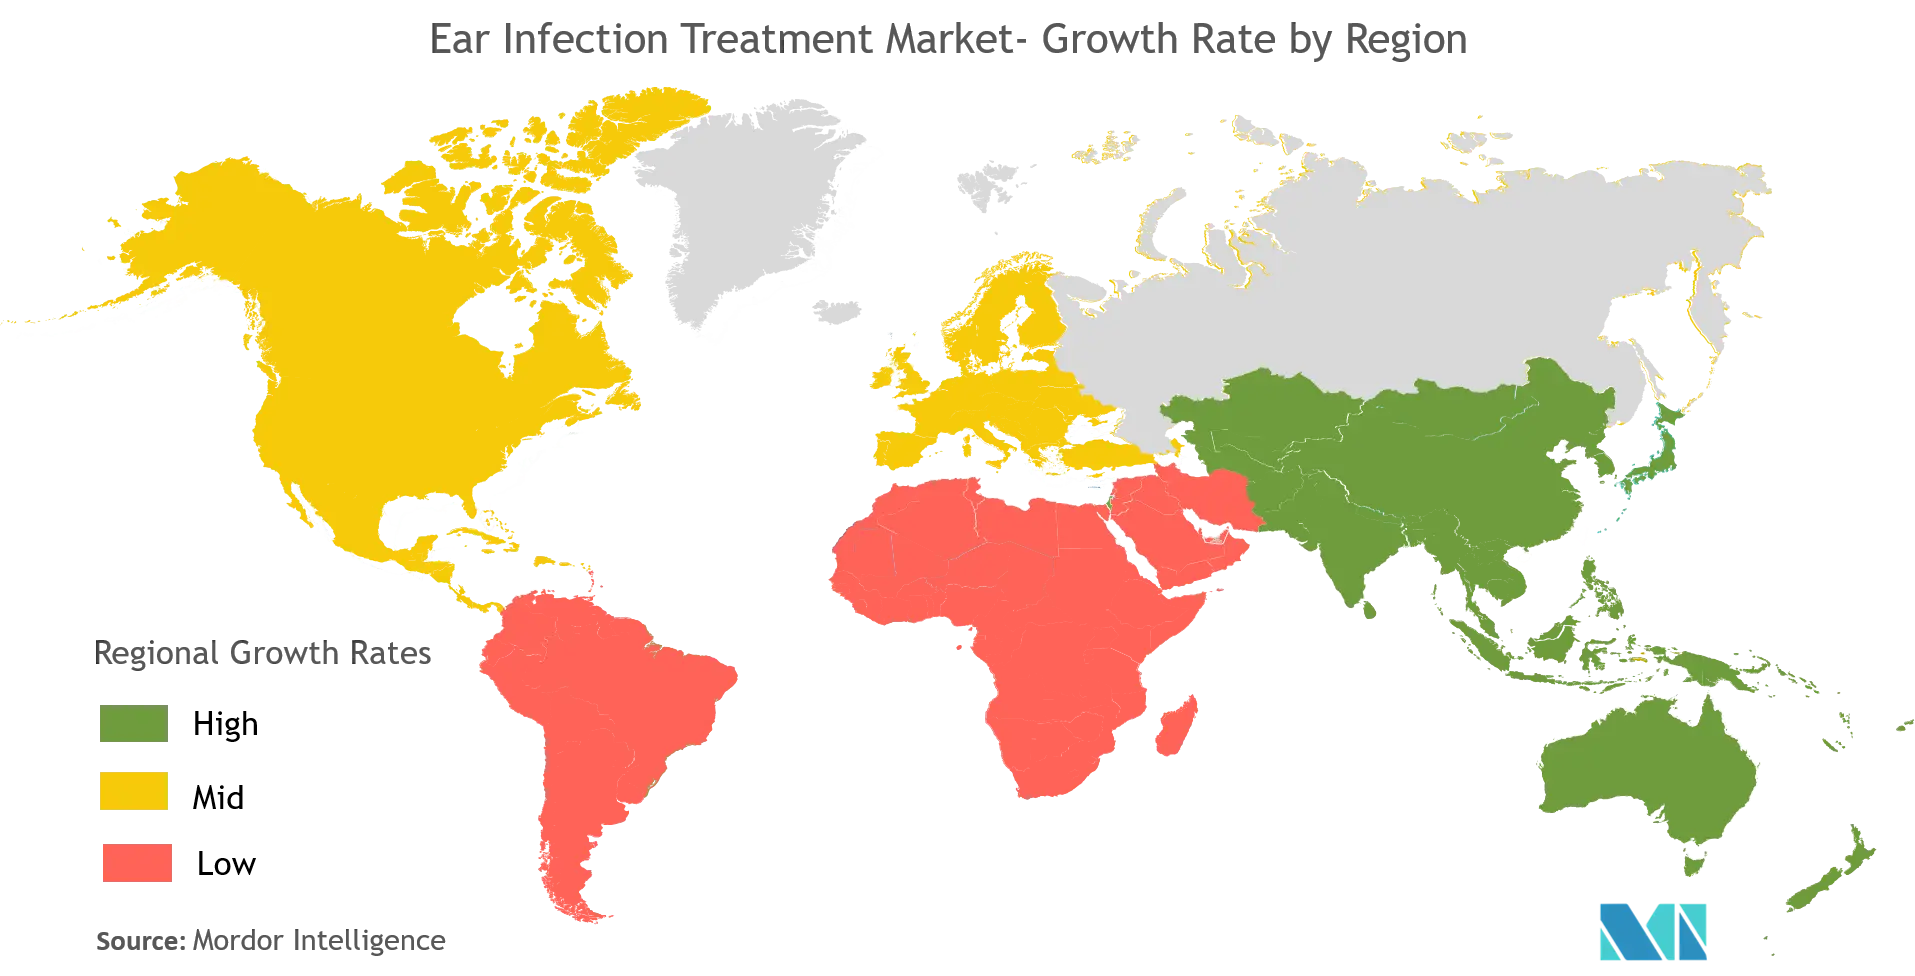 Ear Infection Treatment Market Growth Rate By Region